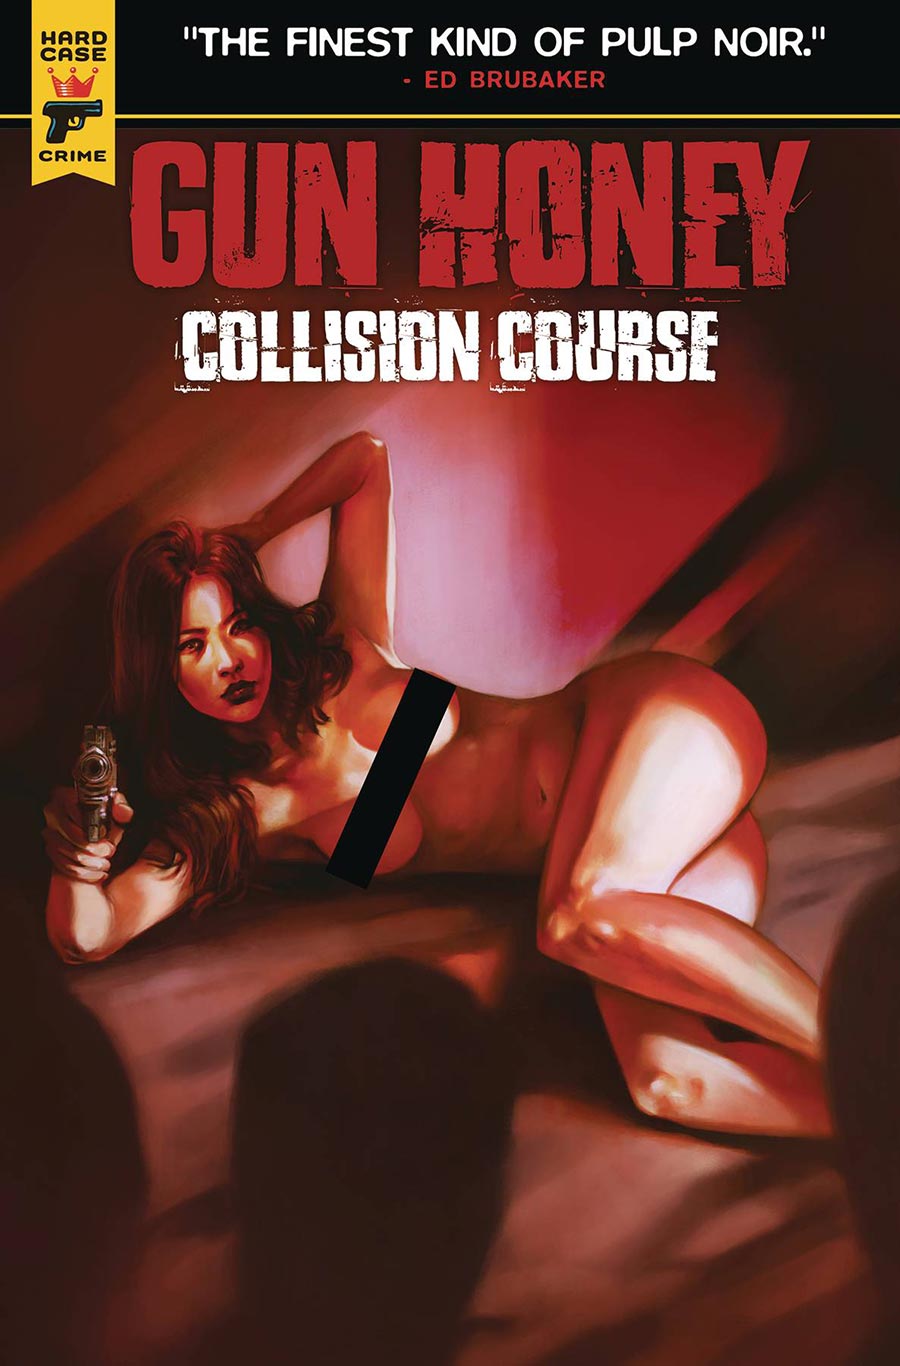 Hard Case Crime Gun Honey Collision Course #2 Cover I Variant Claudia Caranfa Nude Bagged Cover With Polybag